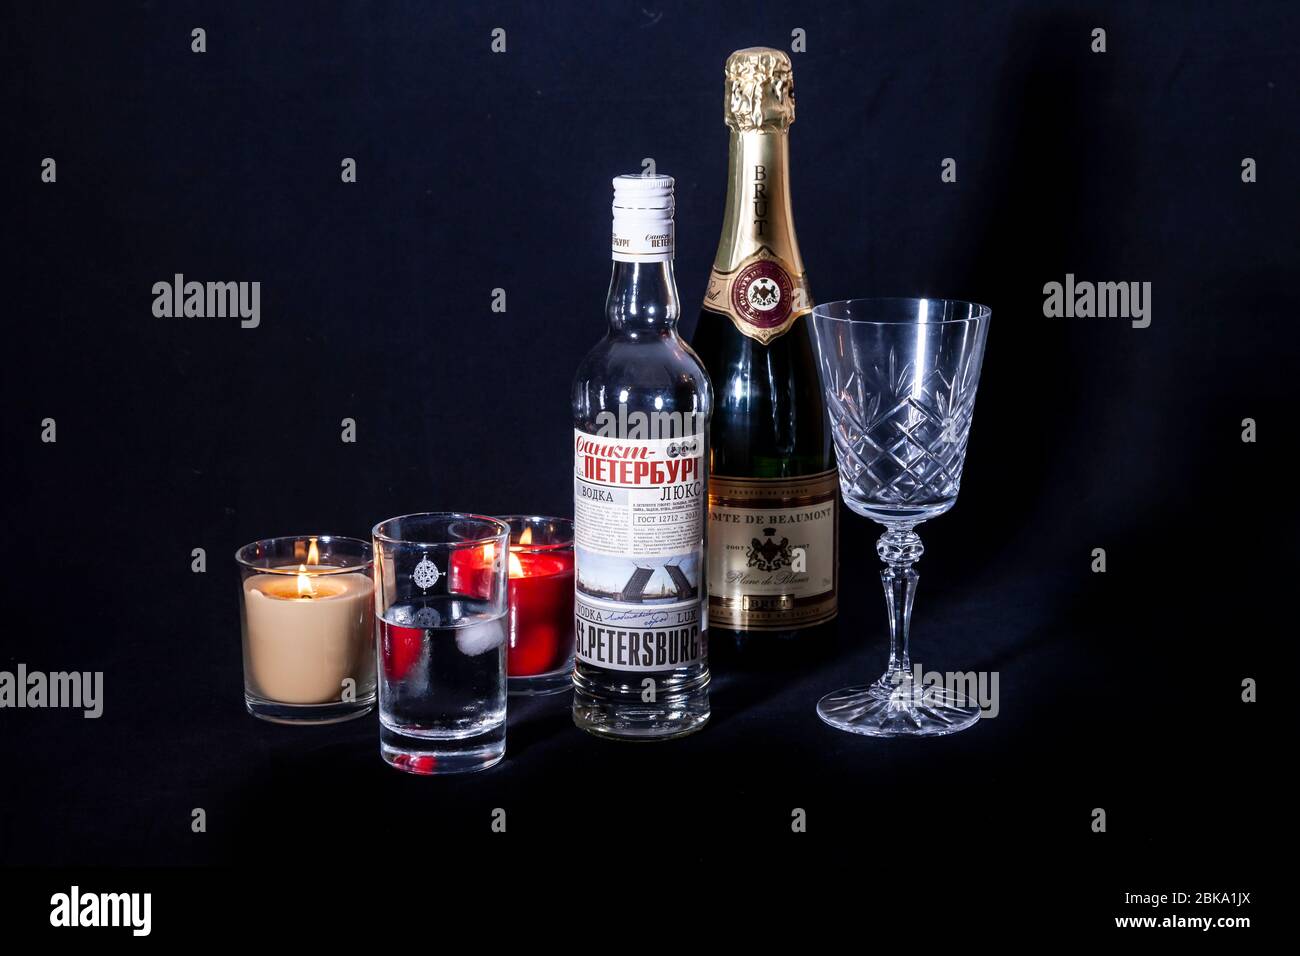 Bottles of drink against a black background Stock Photo